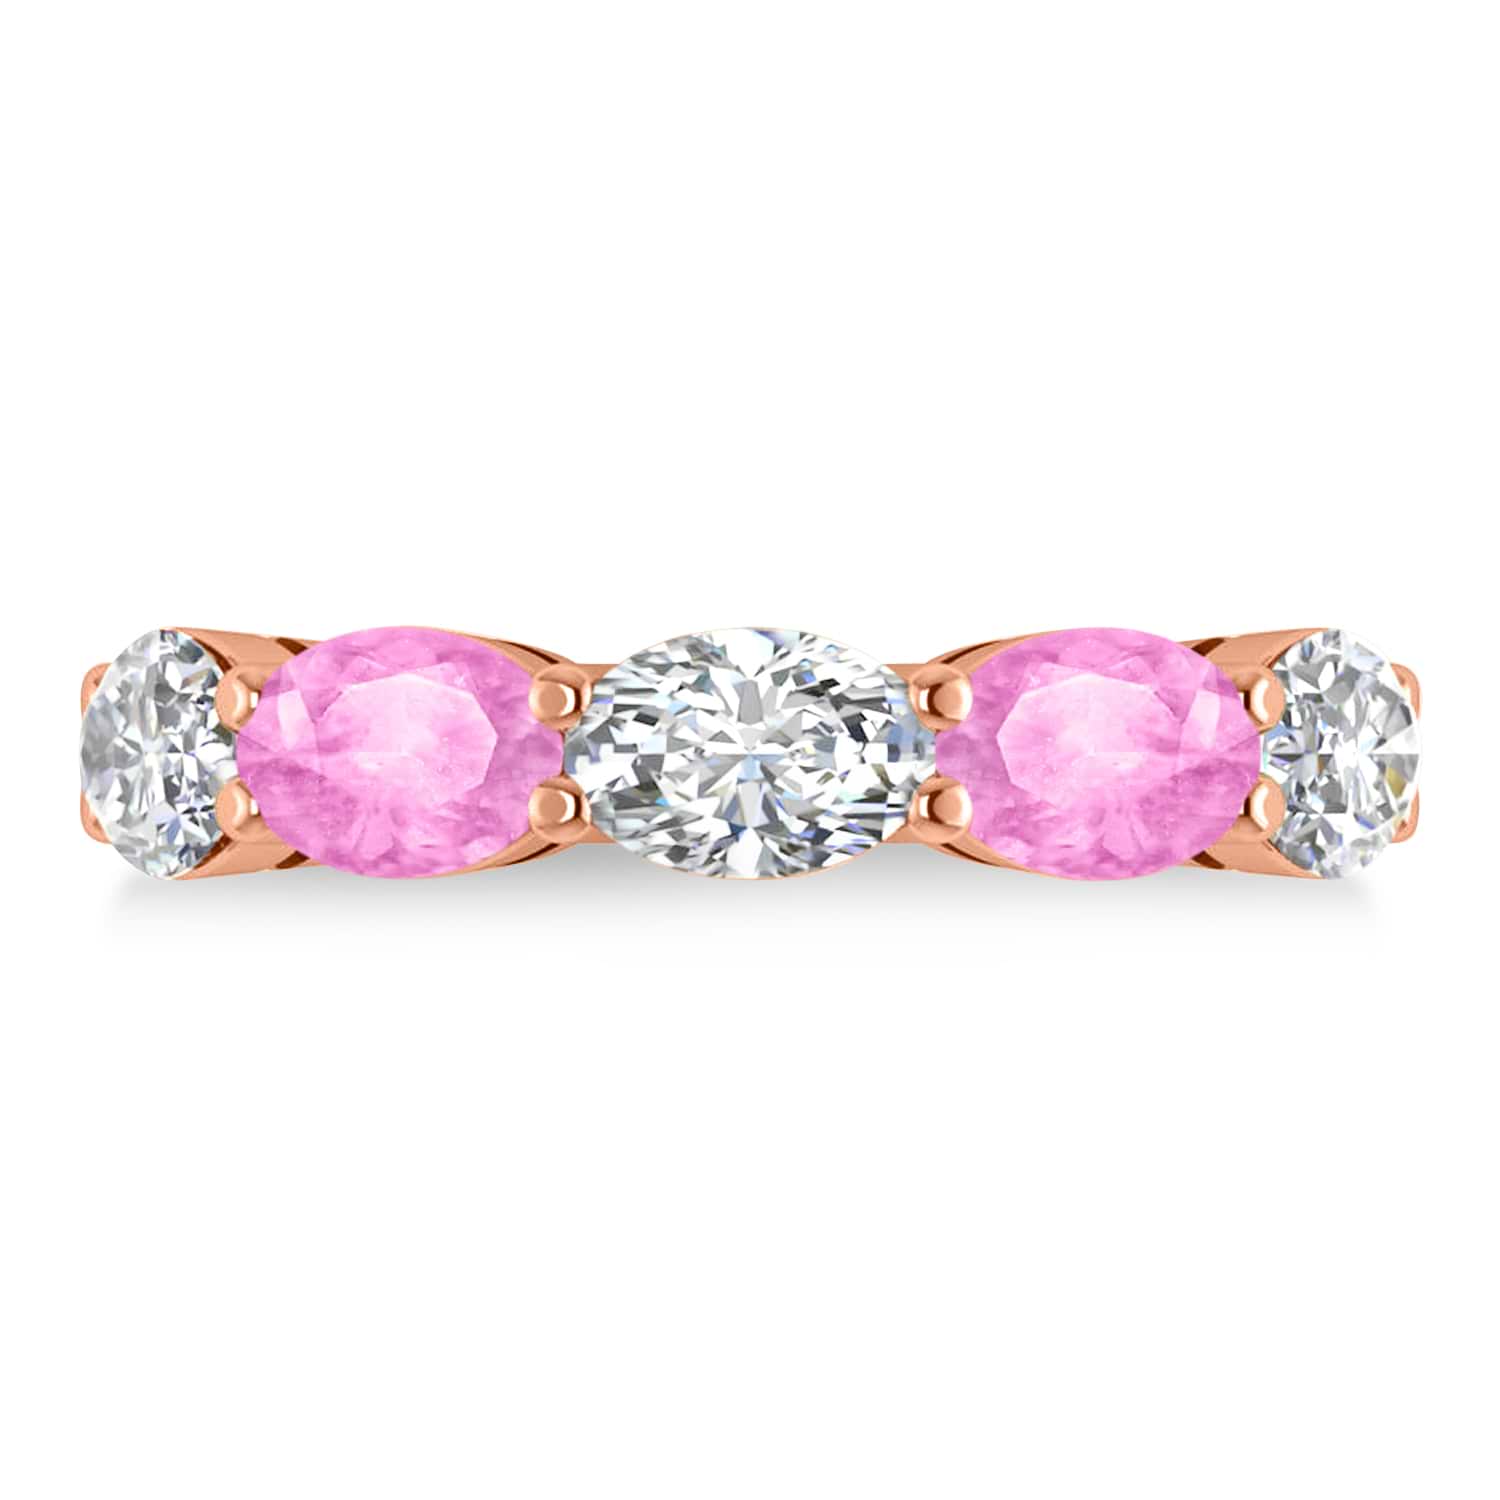 Oval Diamond & Pink Sapphire Five Stone Ring 14k Rose Gold (5.00ct)